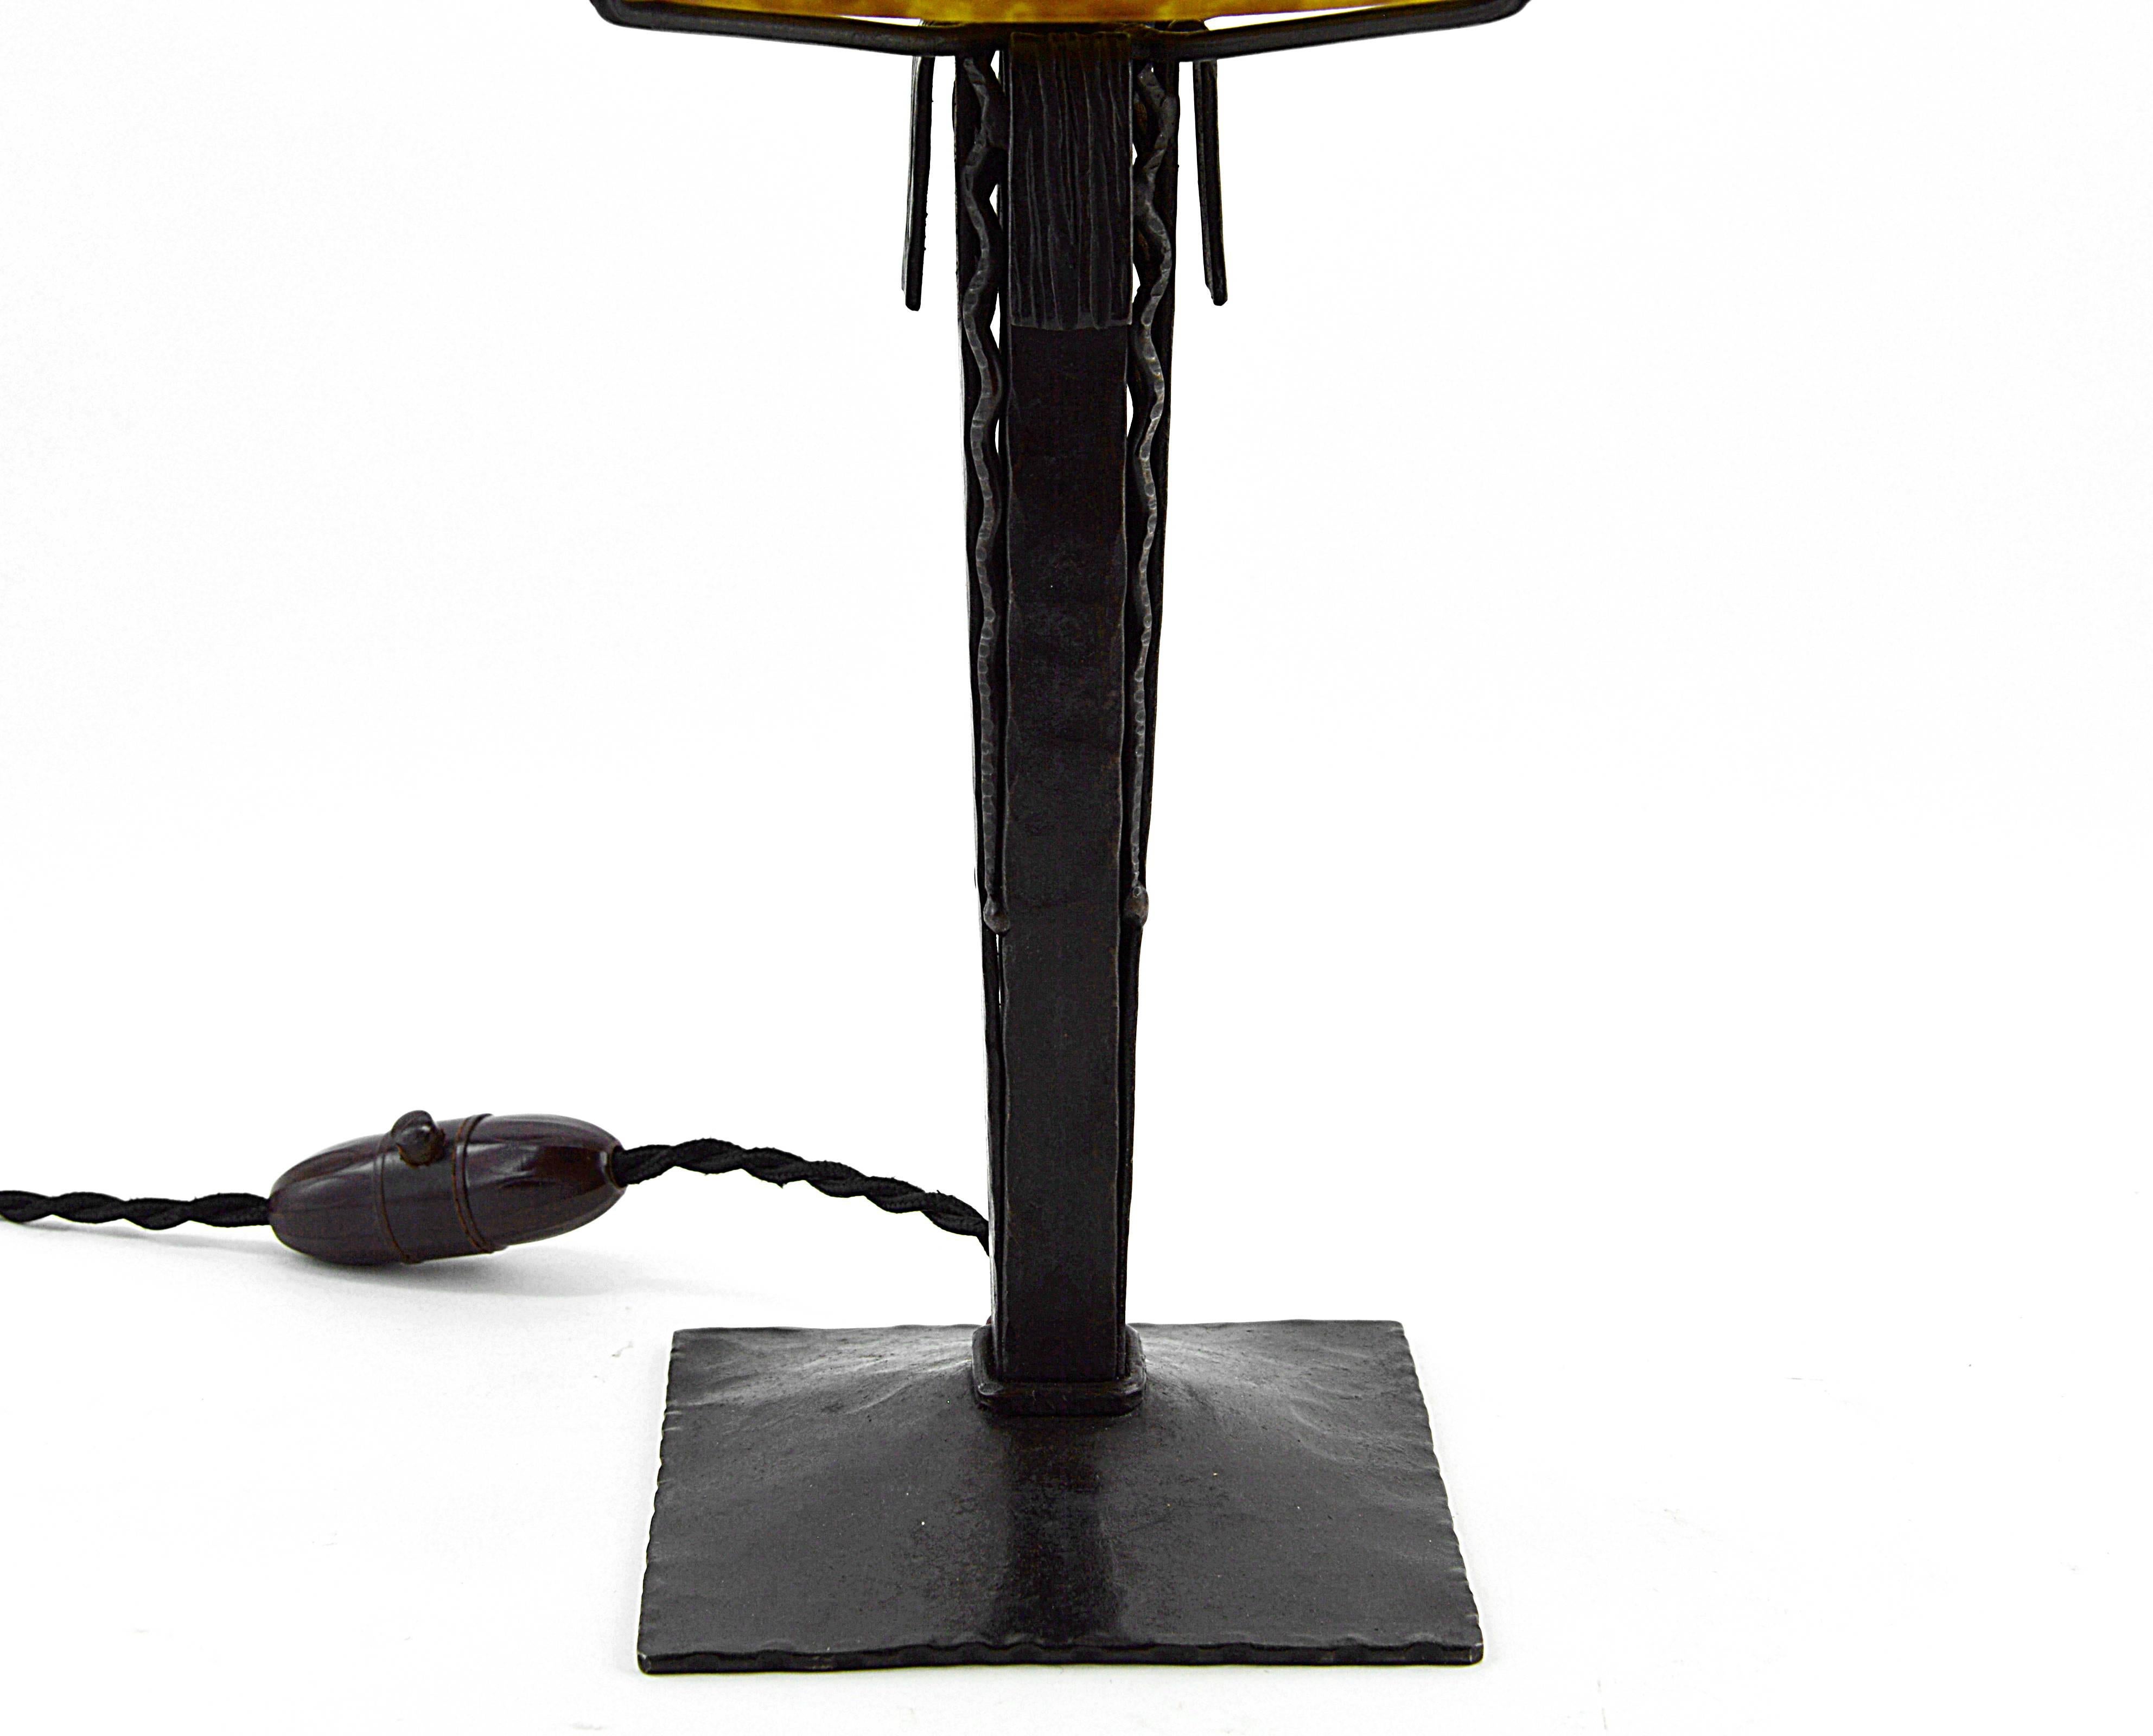 Glass André Delatte French Art Deco Table Lamp, Late 1920s